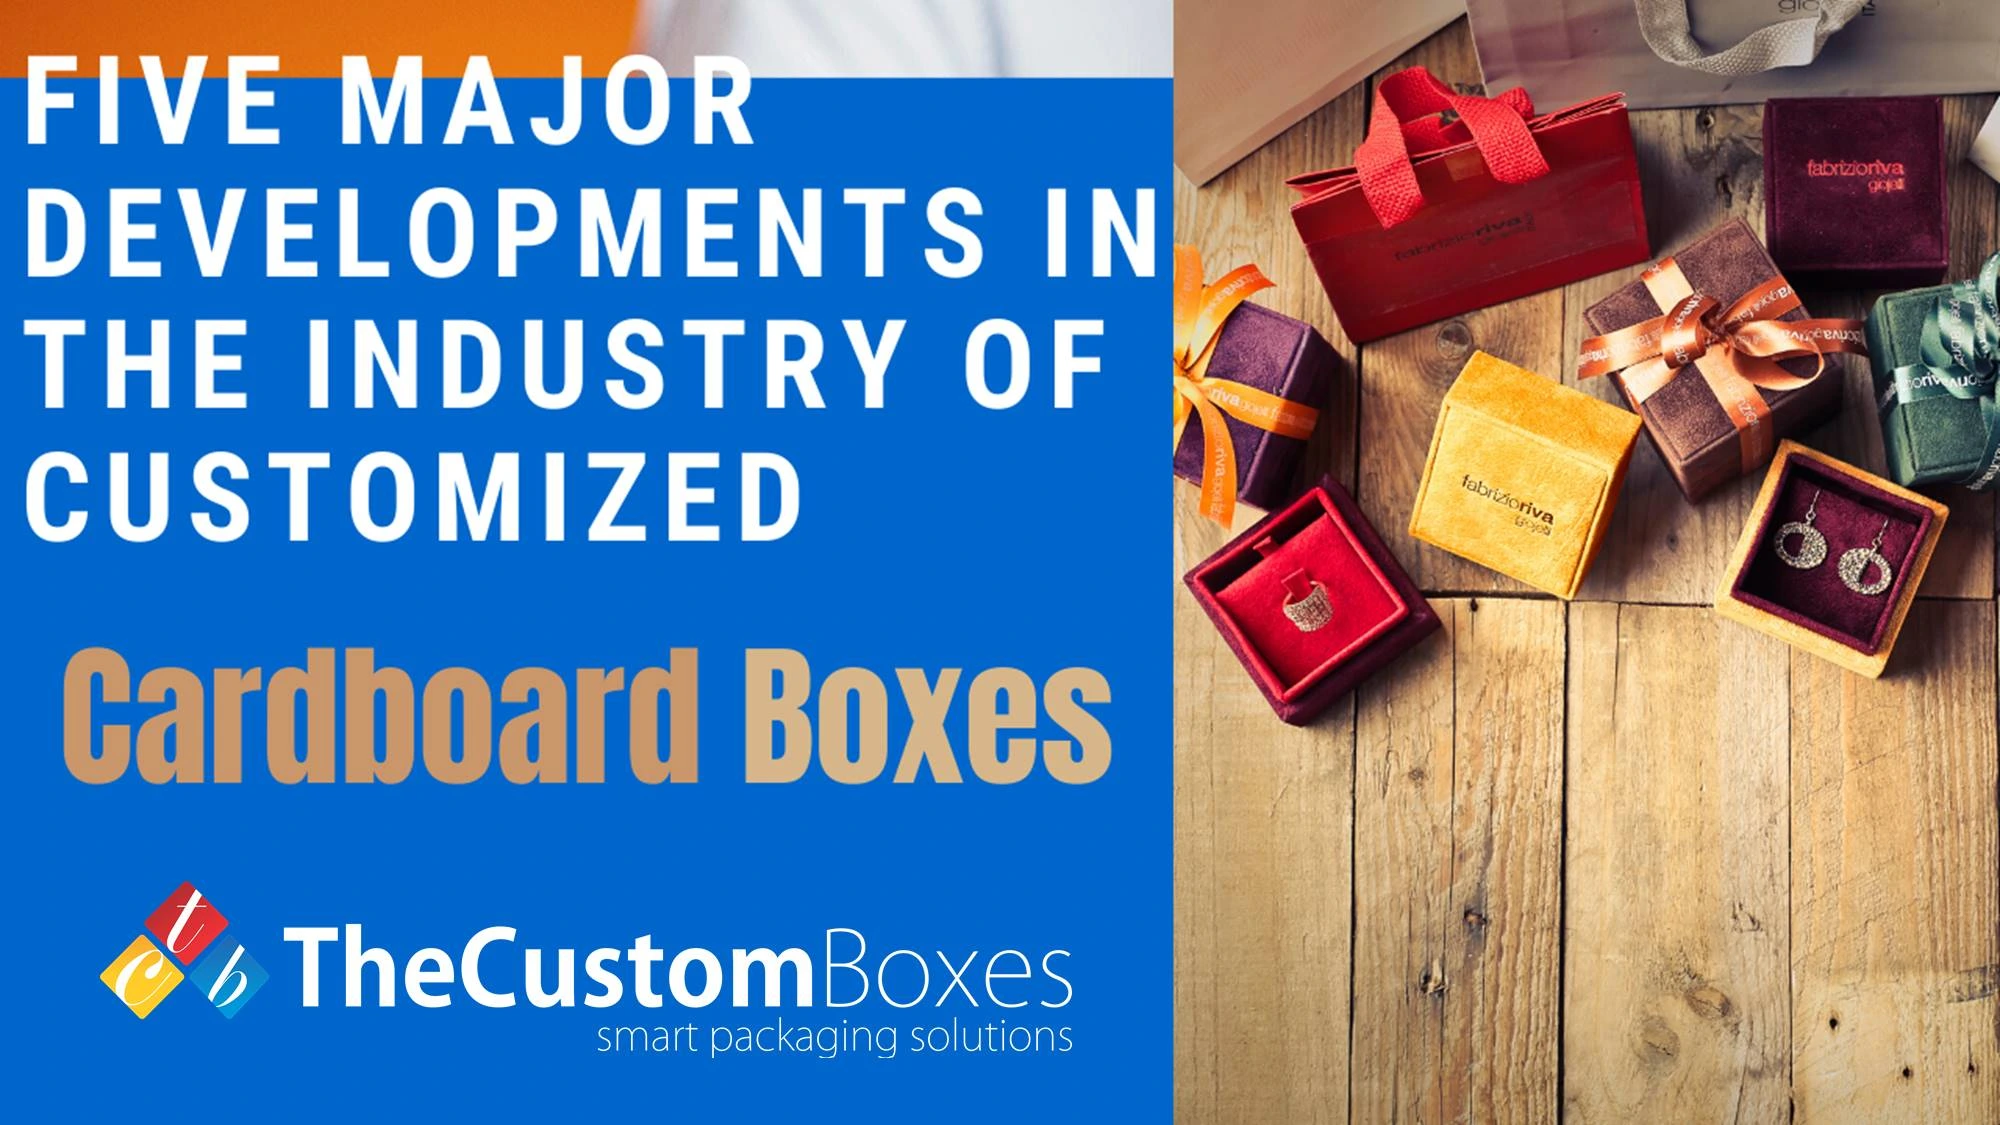 Major Developments In The Industry Of Customized Cardboard Boxes